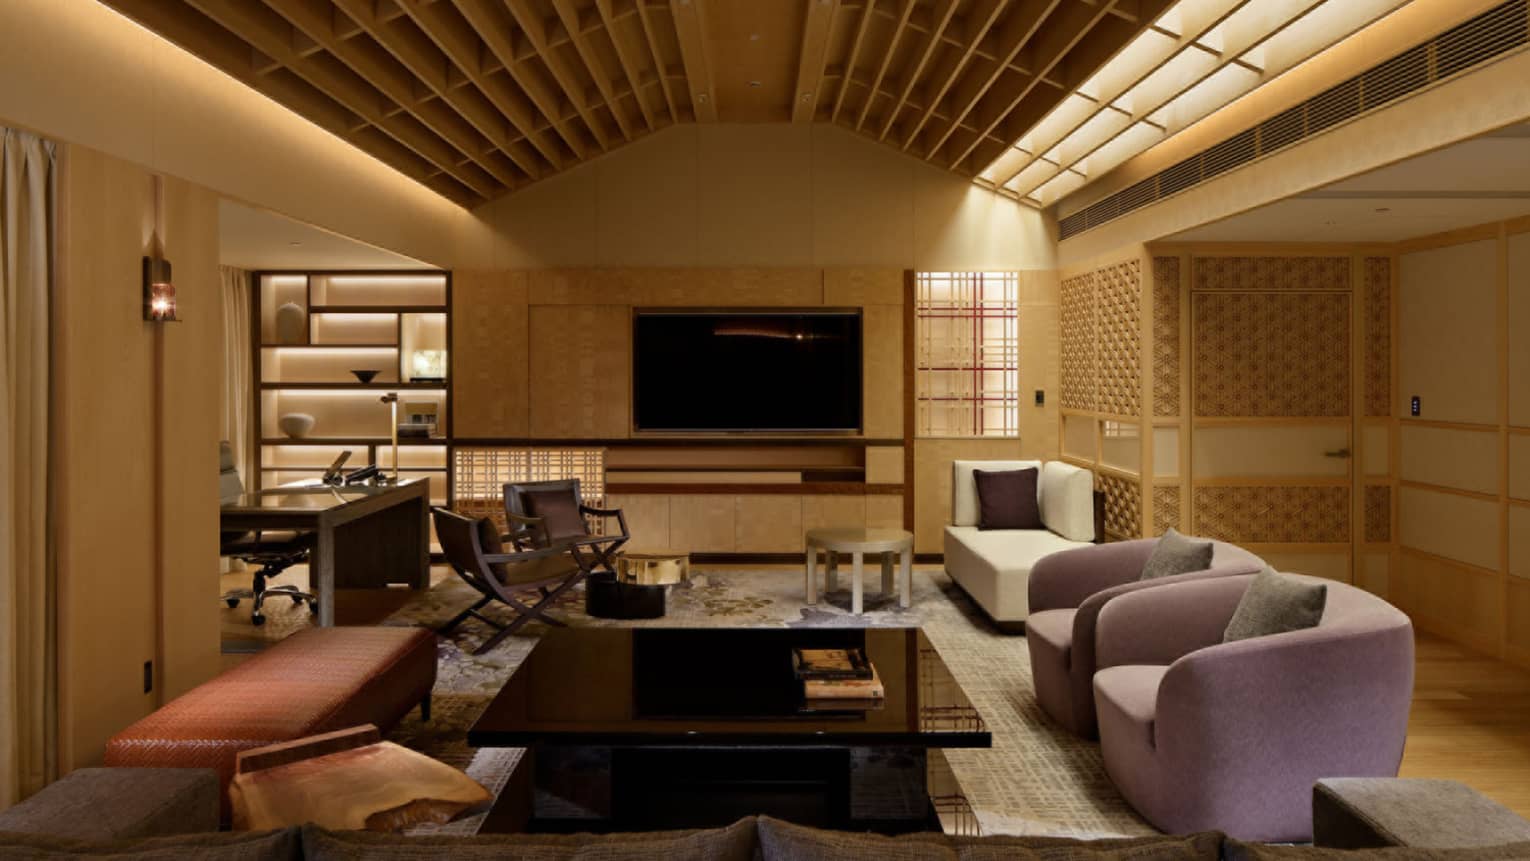 Japanese-stlye living room with illuminated wooden beam ceiling, sofa, two arm chairs, large square coffee table and TV